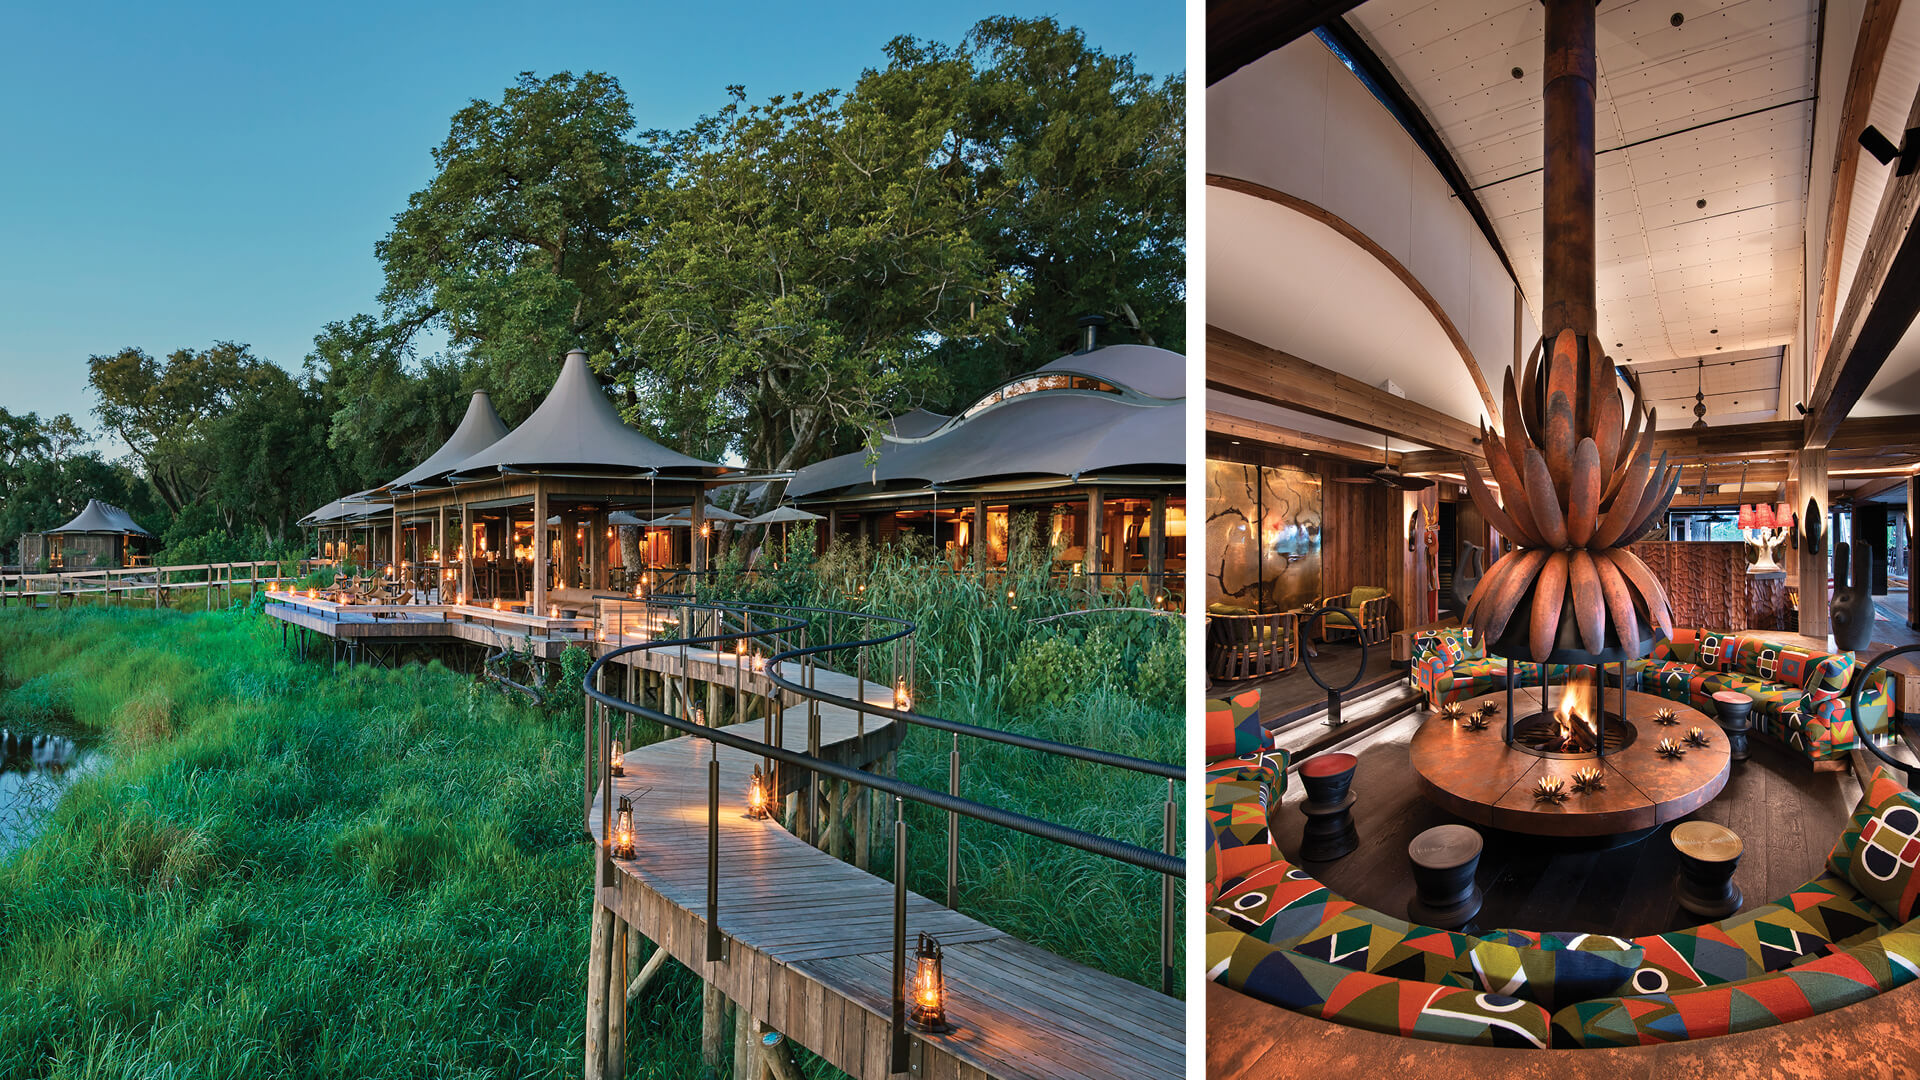 Xigera Safari Lodge is a ‘living gallery’ of Southern African design amid nature